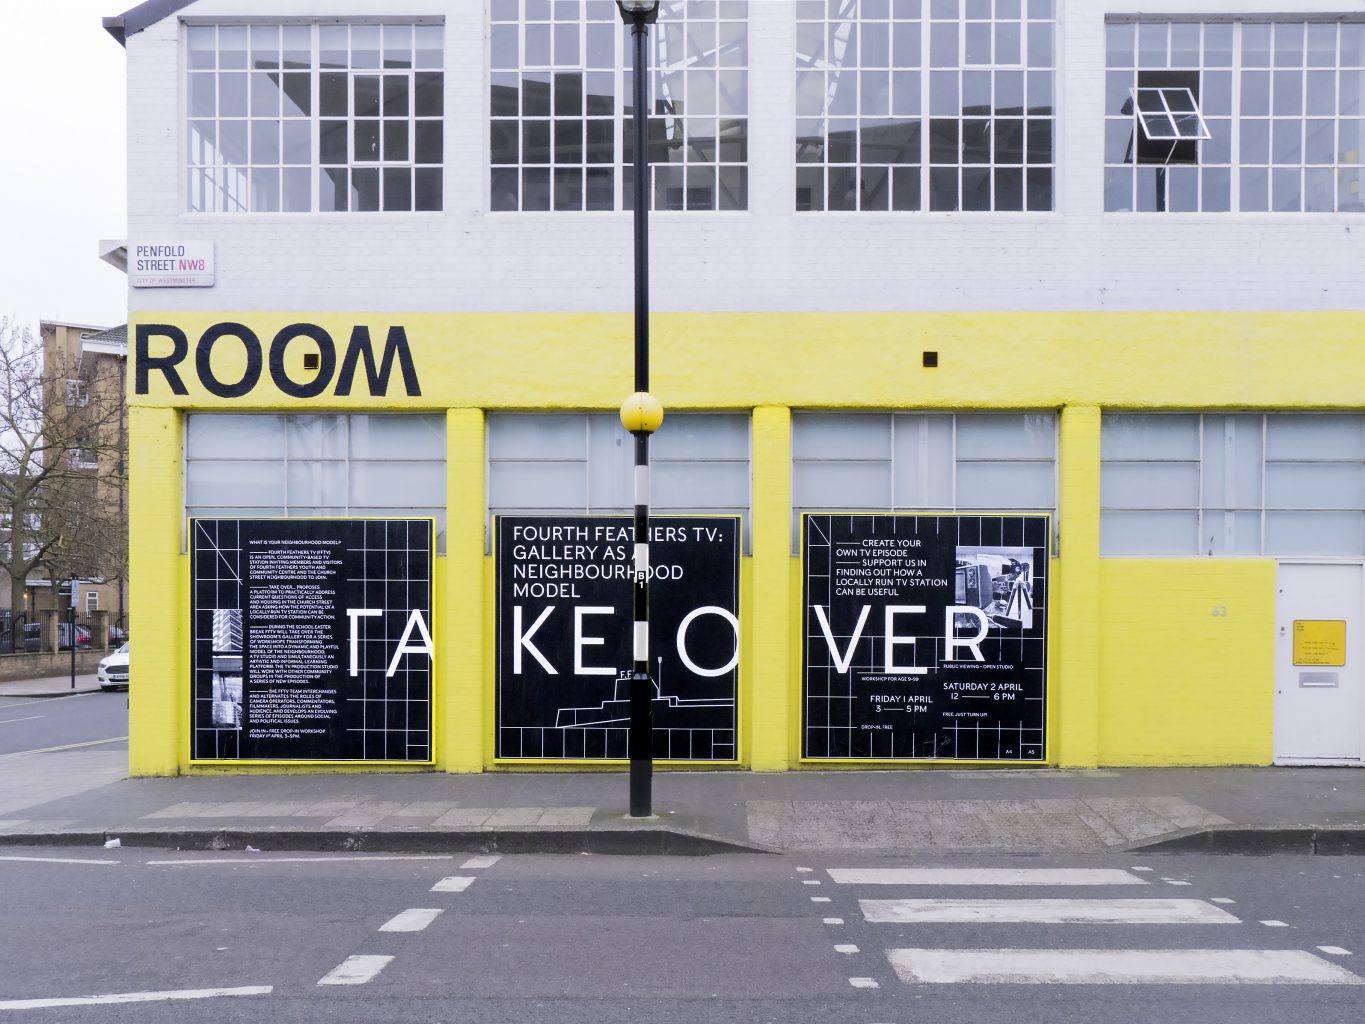 Exhibition design of Take Over: Gallery as a neighbourhood model, exhibition and community workshop at The Showroom Gallery, Paddington, London, designed by In the shade of a tree studio, founded by Sophie Demay and Maël Fournier Comte.